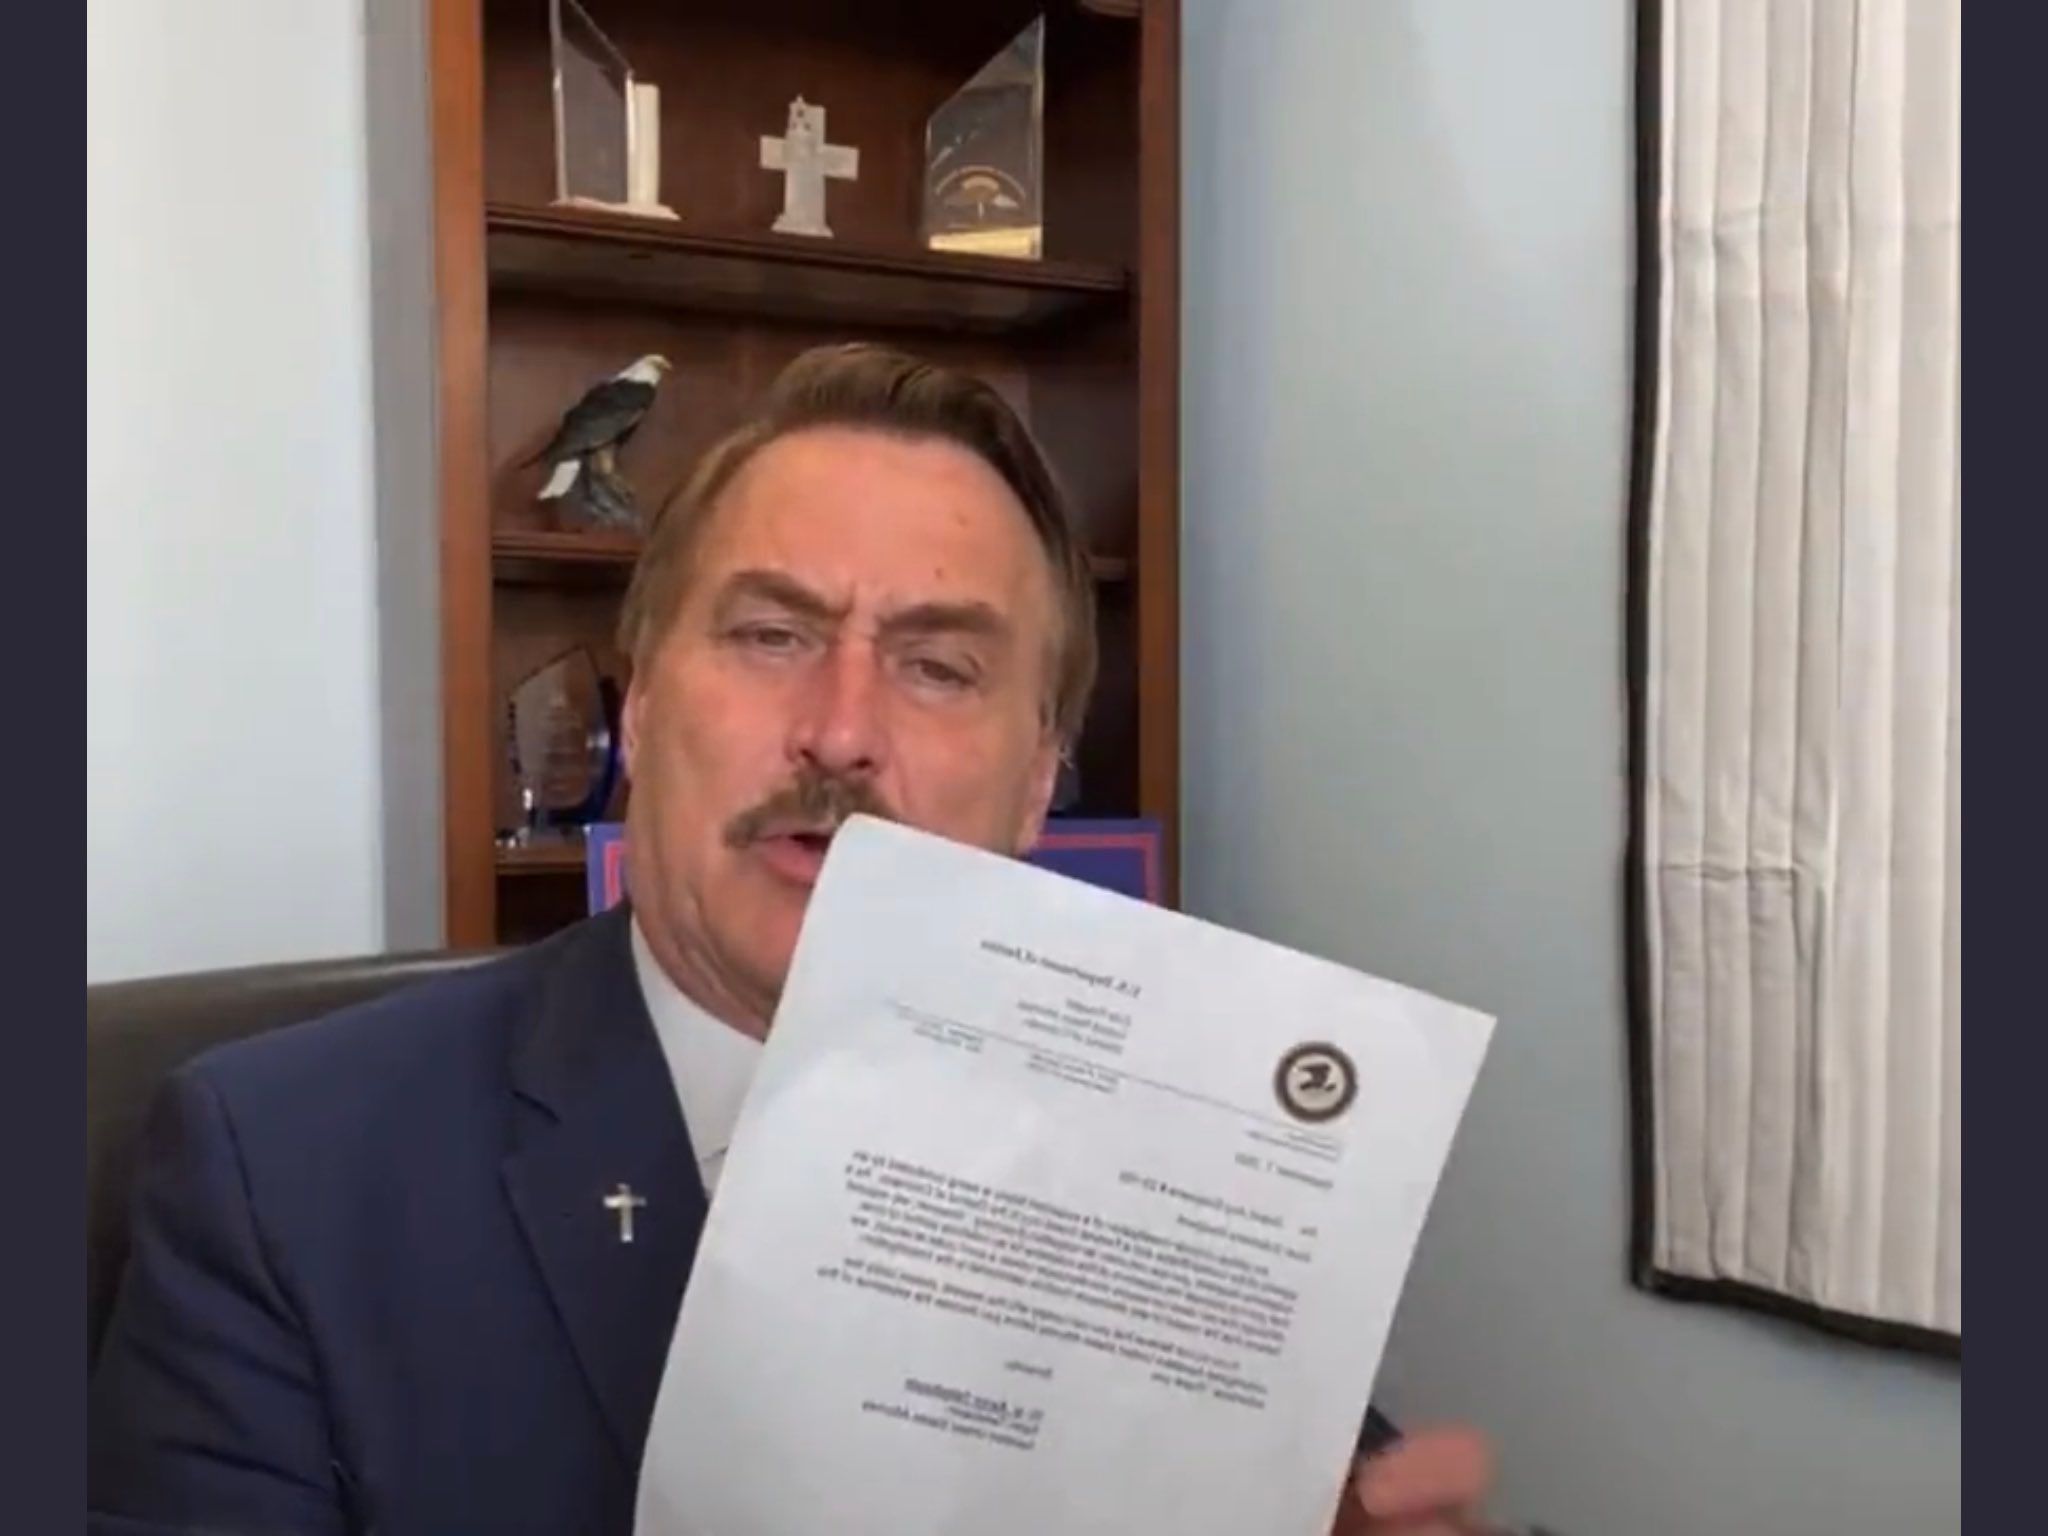 Who is Mike Lindell?